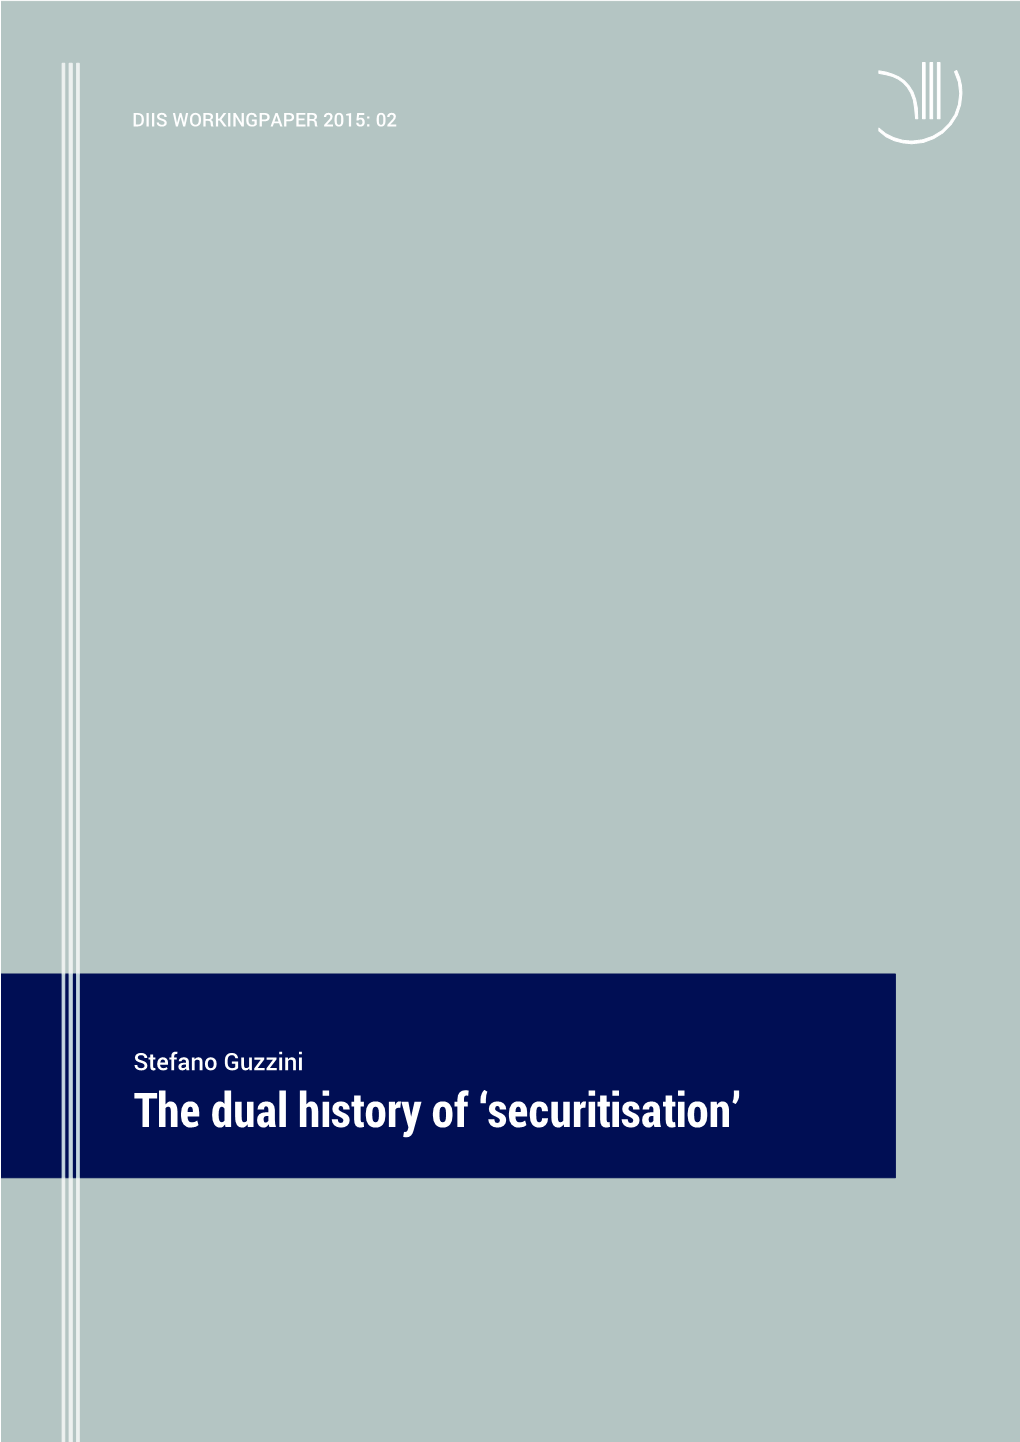 The Dual History of 'Securitisation'